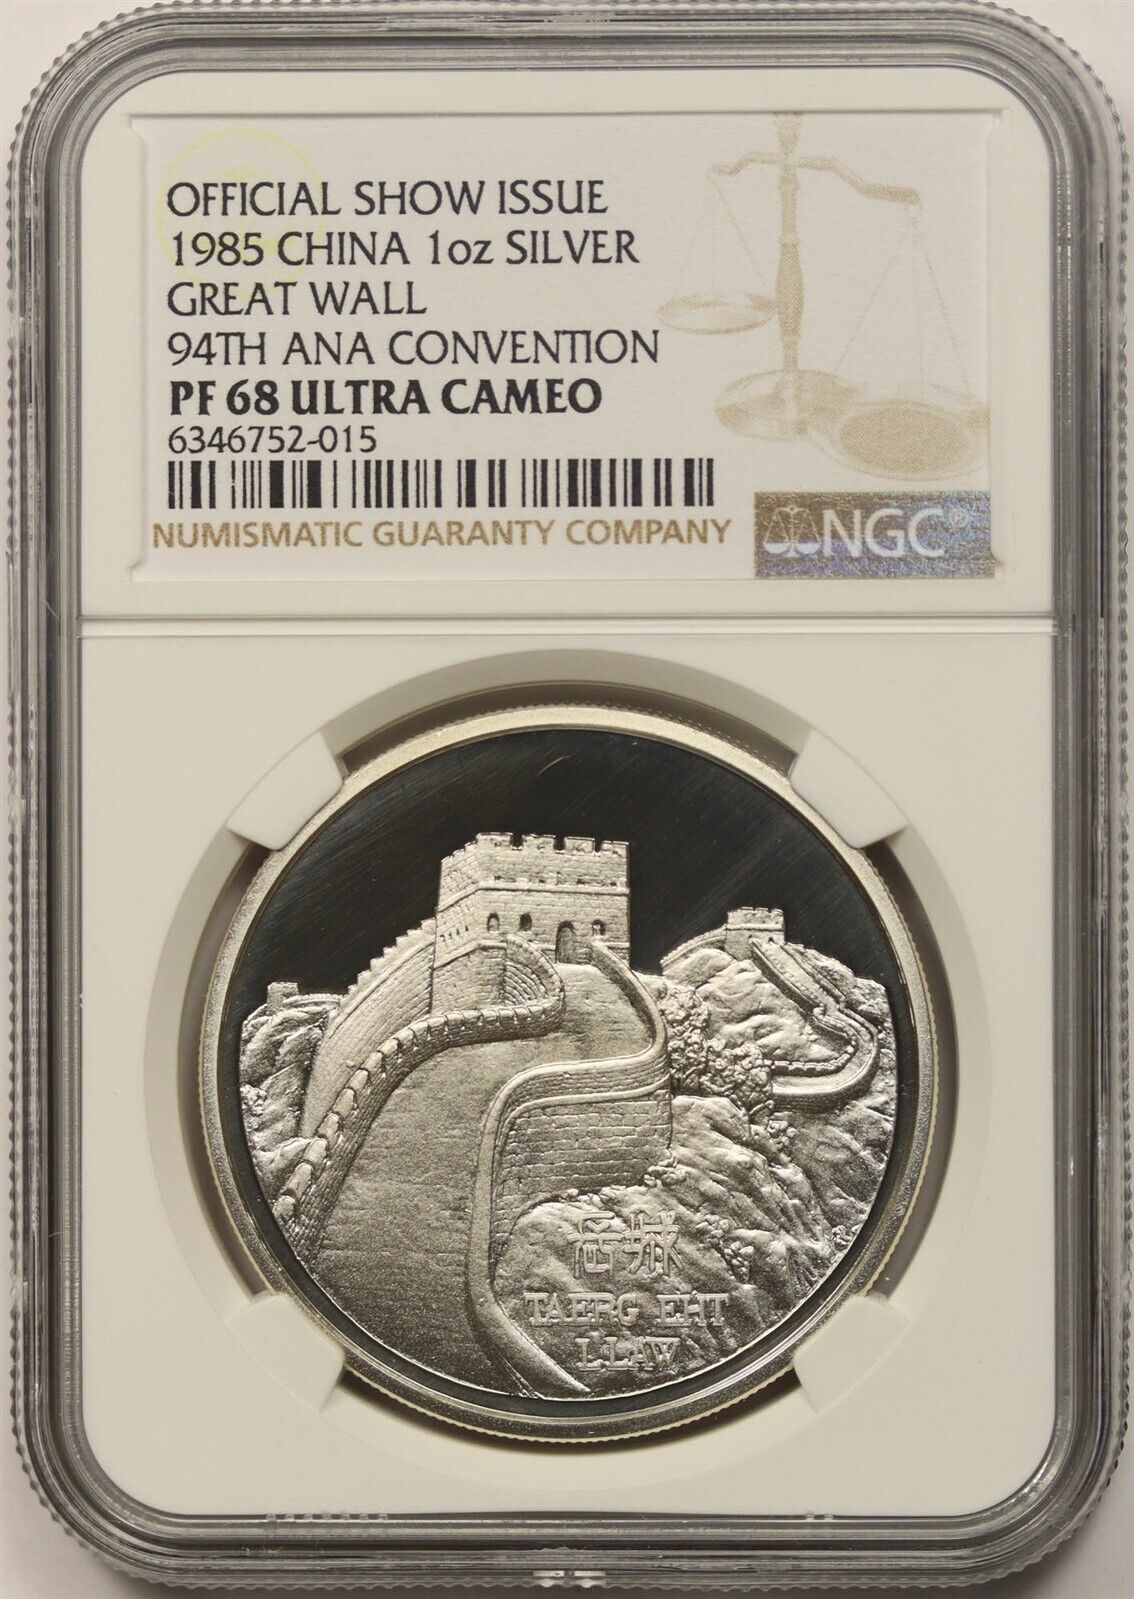 1985 China 1 oz Silver Great Wall NGC PF68 Ultra Cameo 94th ANA Convention Error